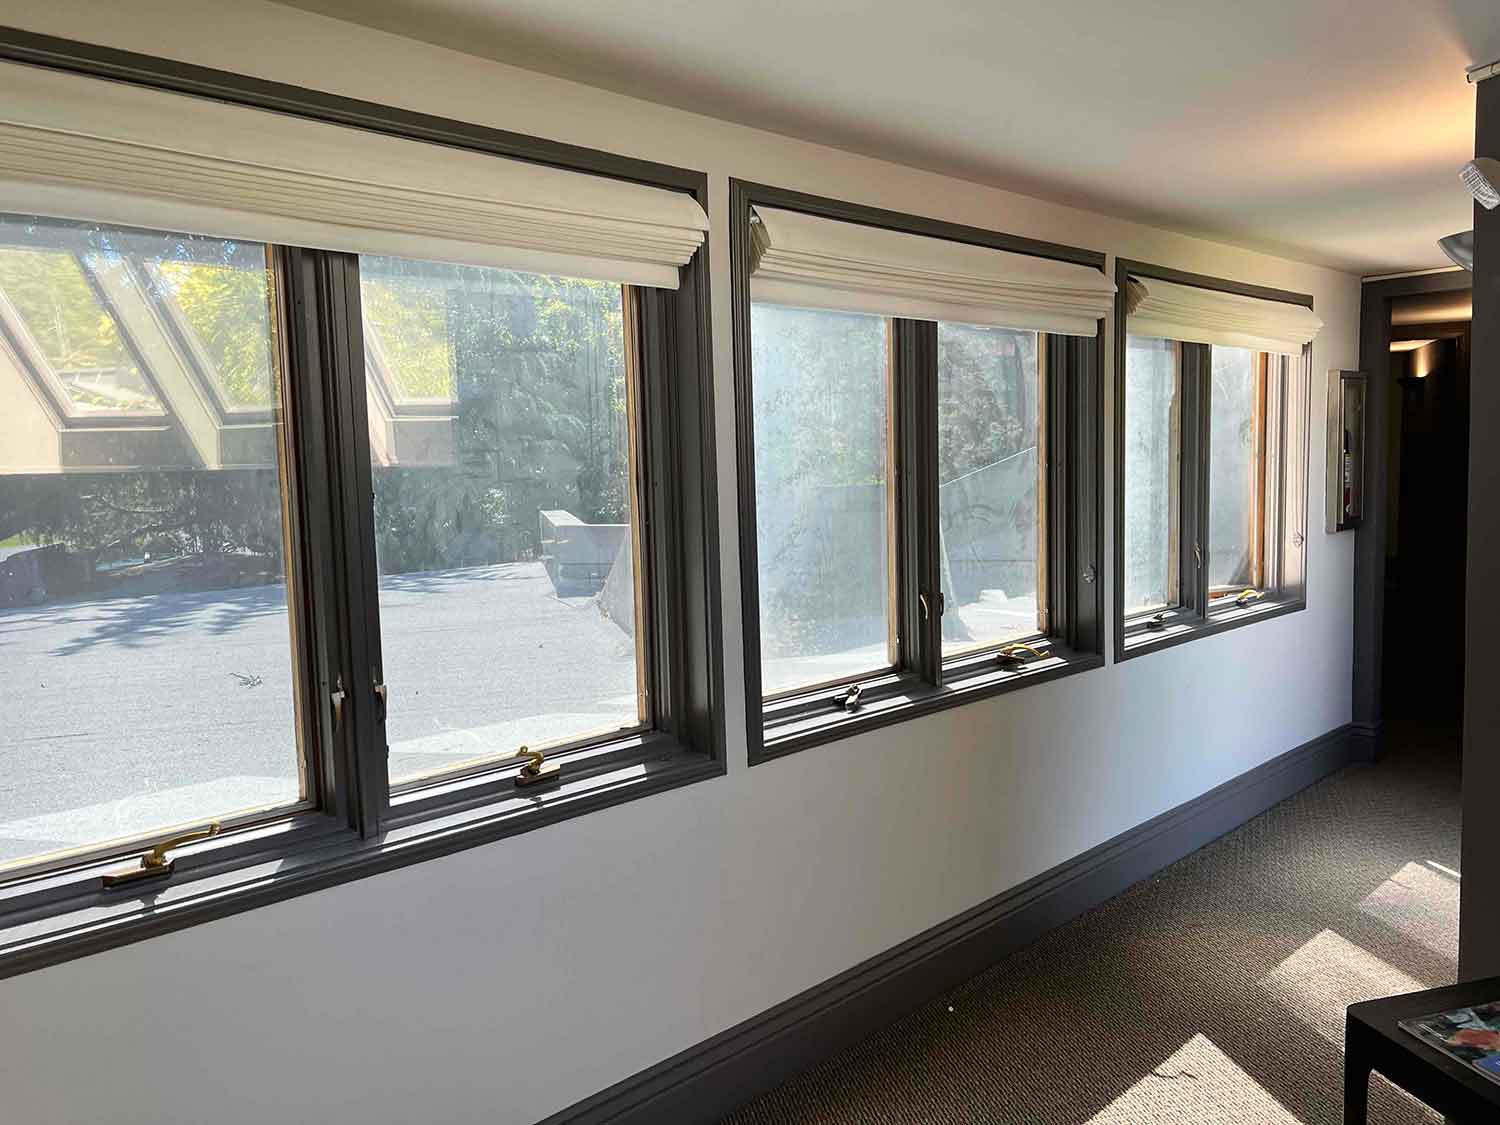 An Affordable Window Tint Option for Kentfield, CA homes from ClimatePro